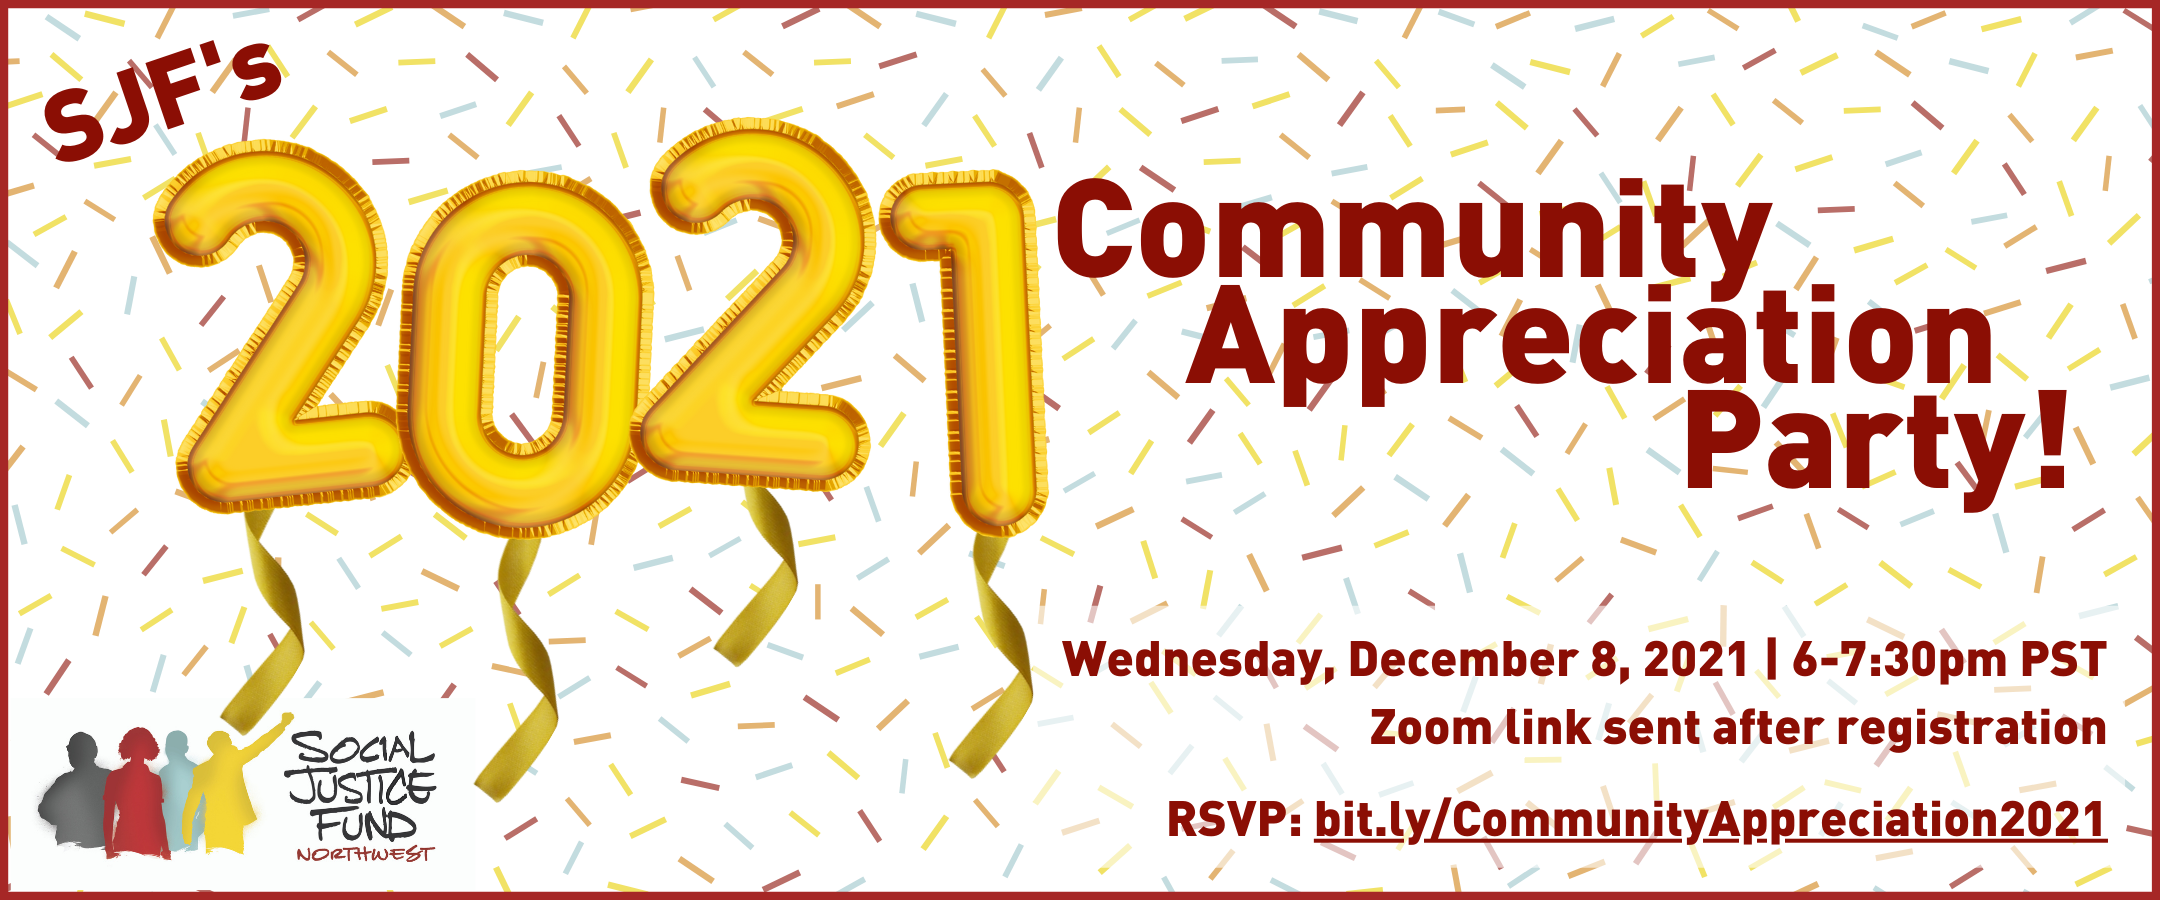 Rectangular banner with background of multicolored confetti on white. Gold number balloons and red text read SJFs 2021 Community Appreciation Party